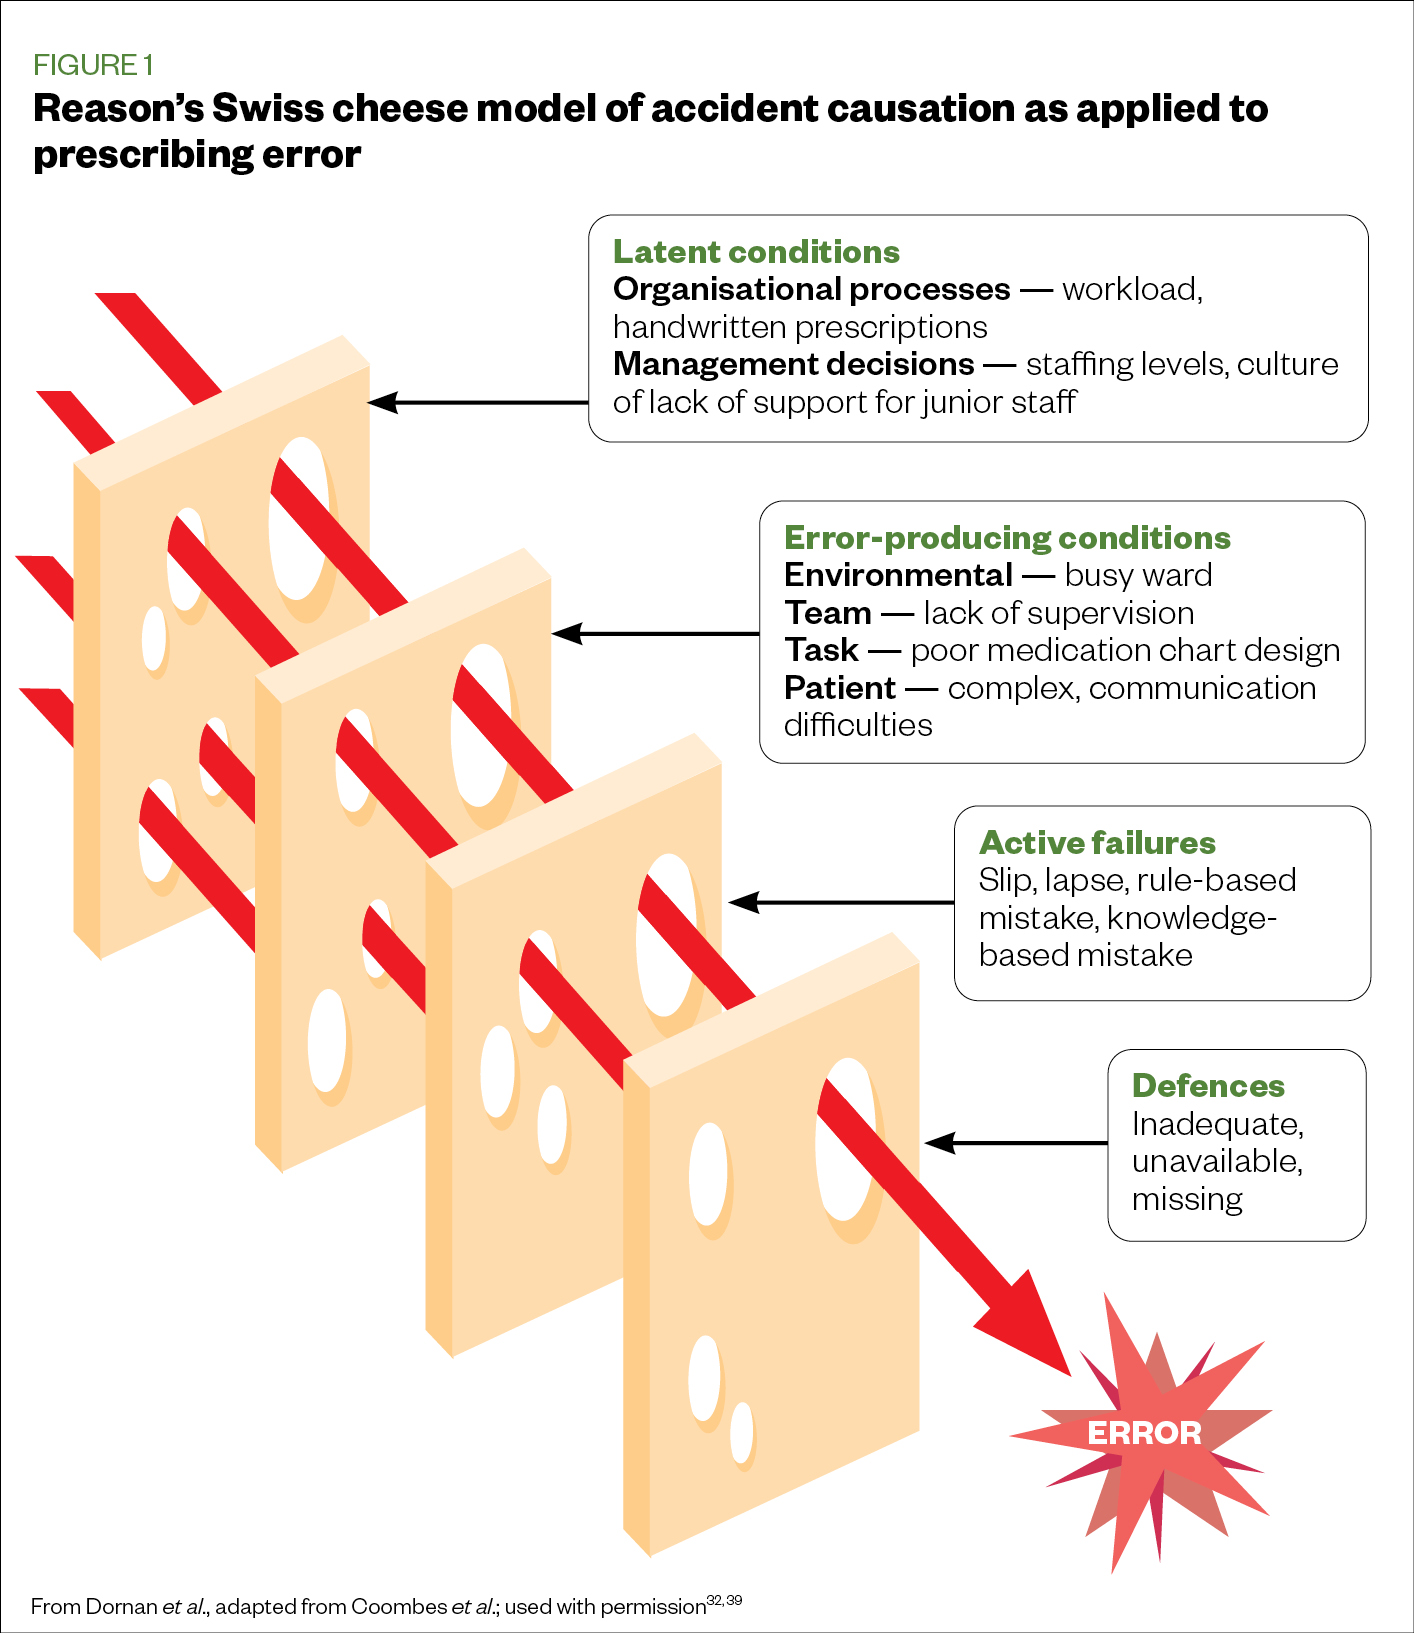 Figure 1: Reason's Swiss cheese model of accident causation as applied to prescribing error